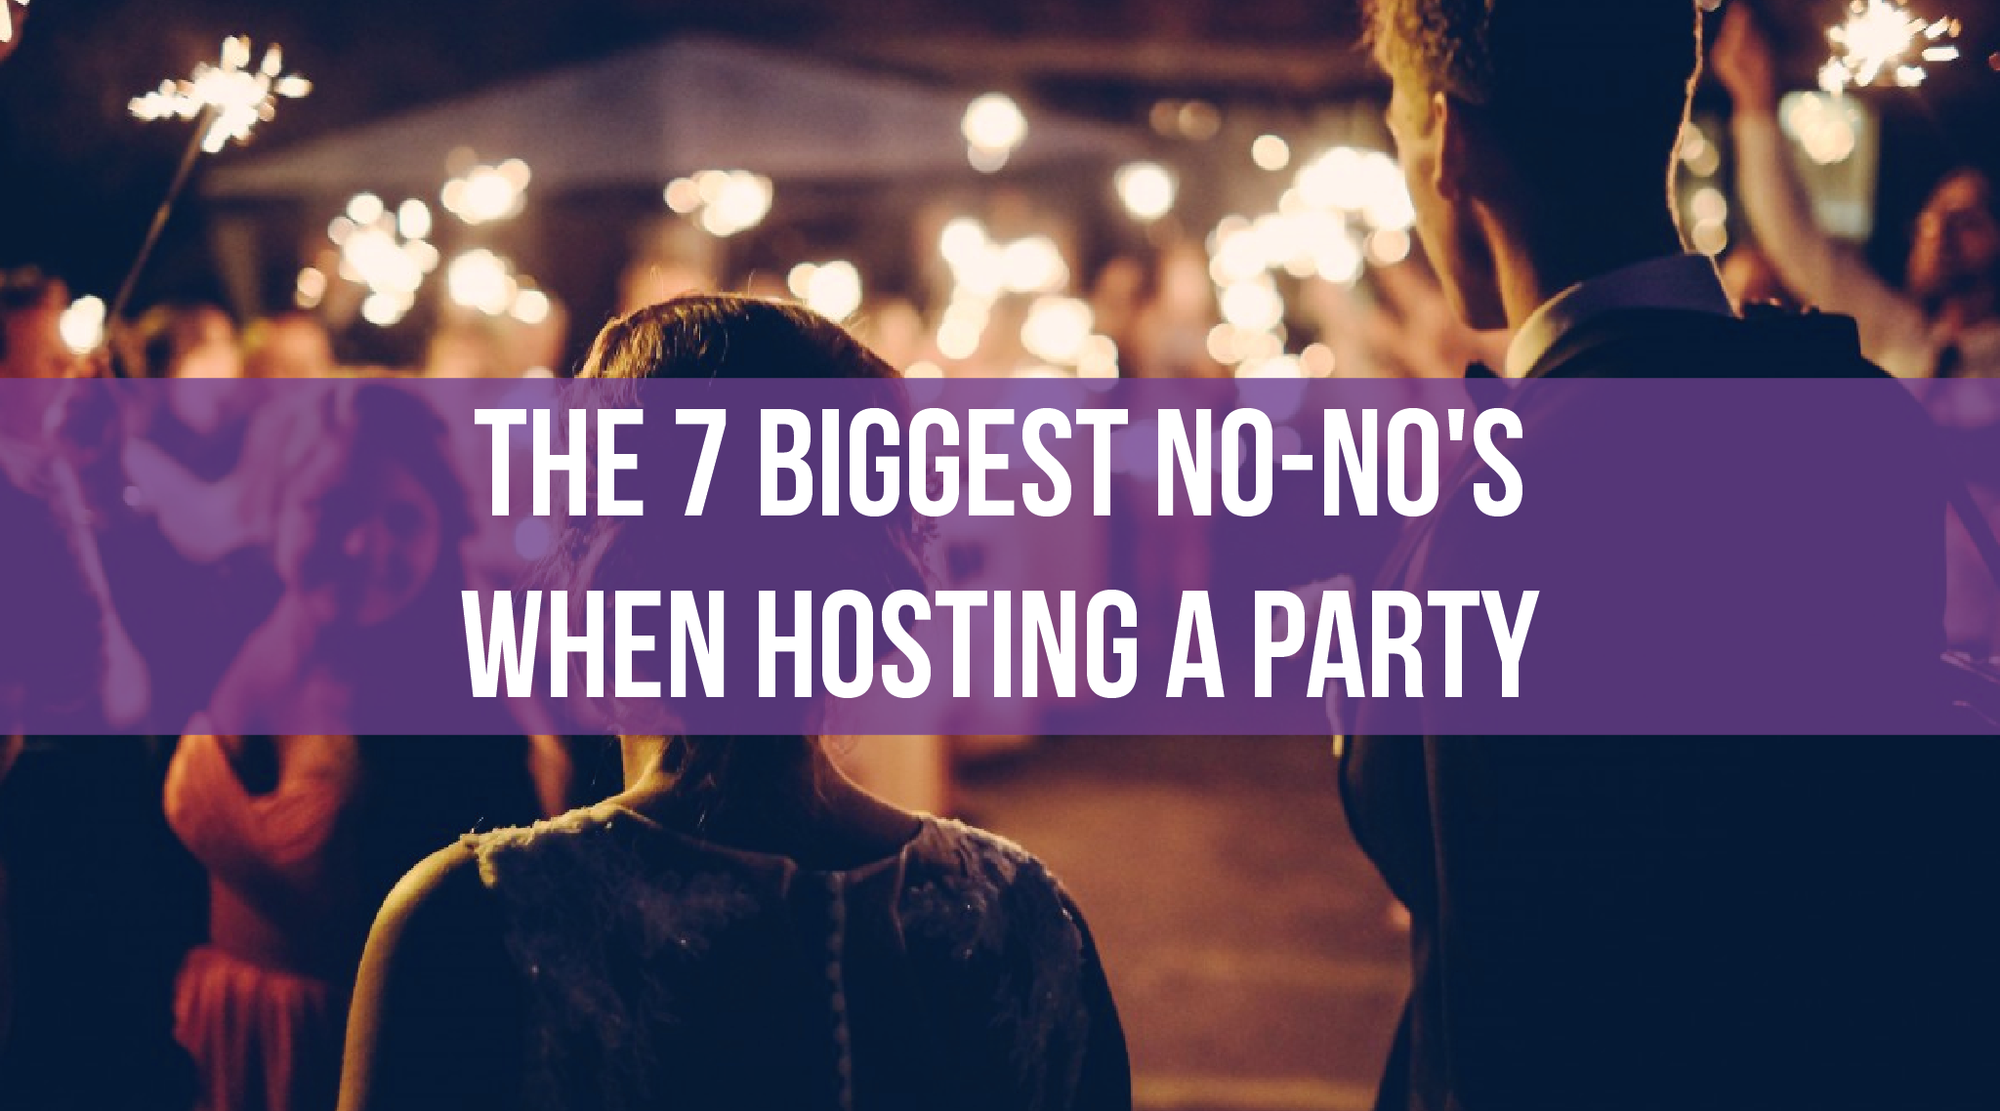 The 7 Biggest No-no's When Hosting a Party